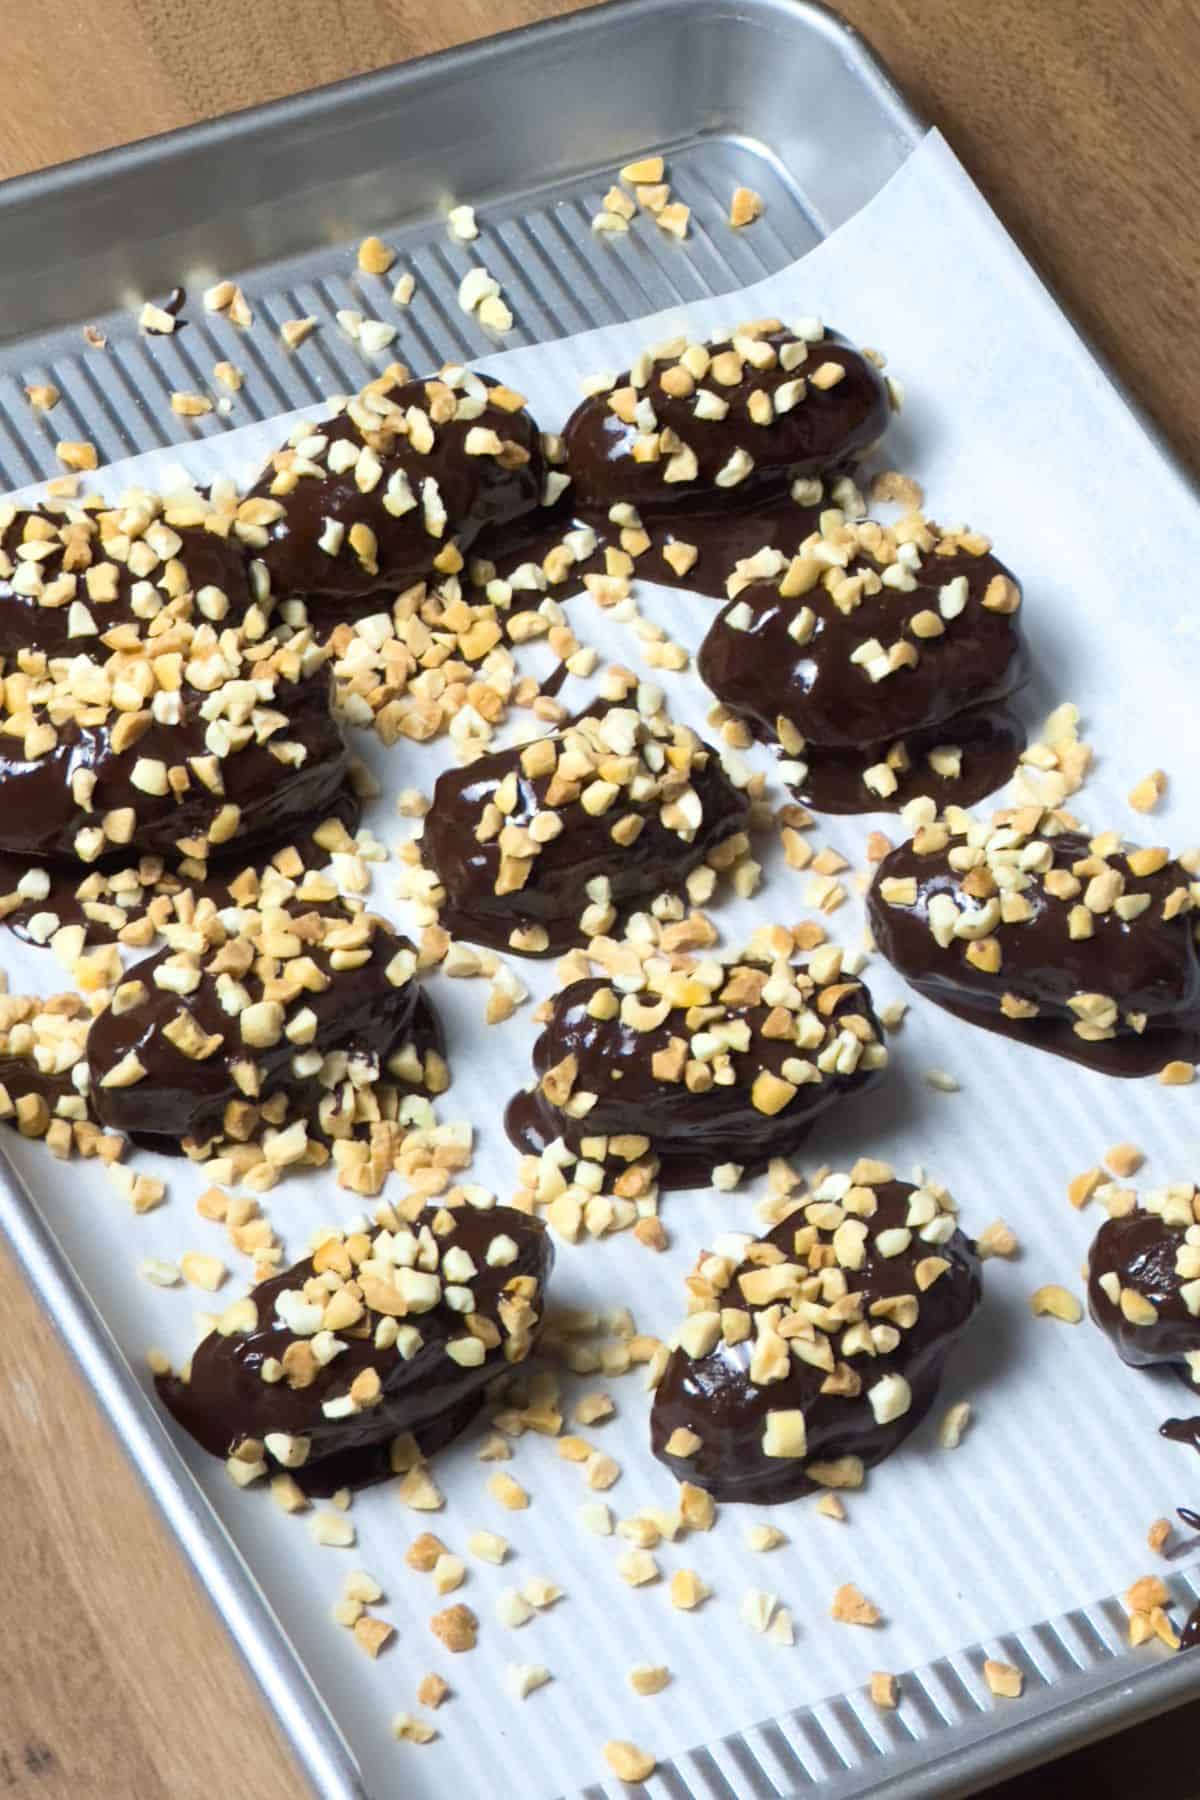 Freshly chocolate-covered stuffed dates generously topped with crushed nuts laid out on a baking sheet lined with parchment paper, ready to be chilled.